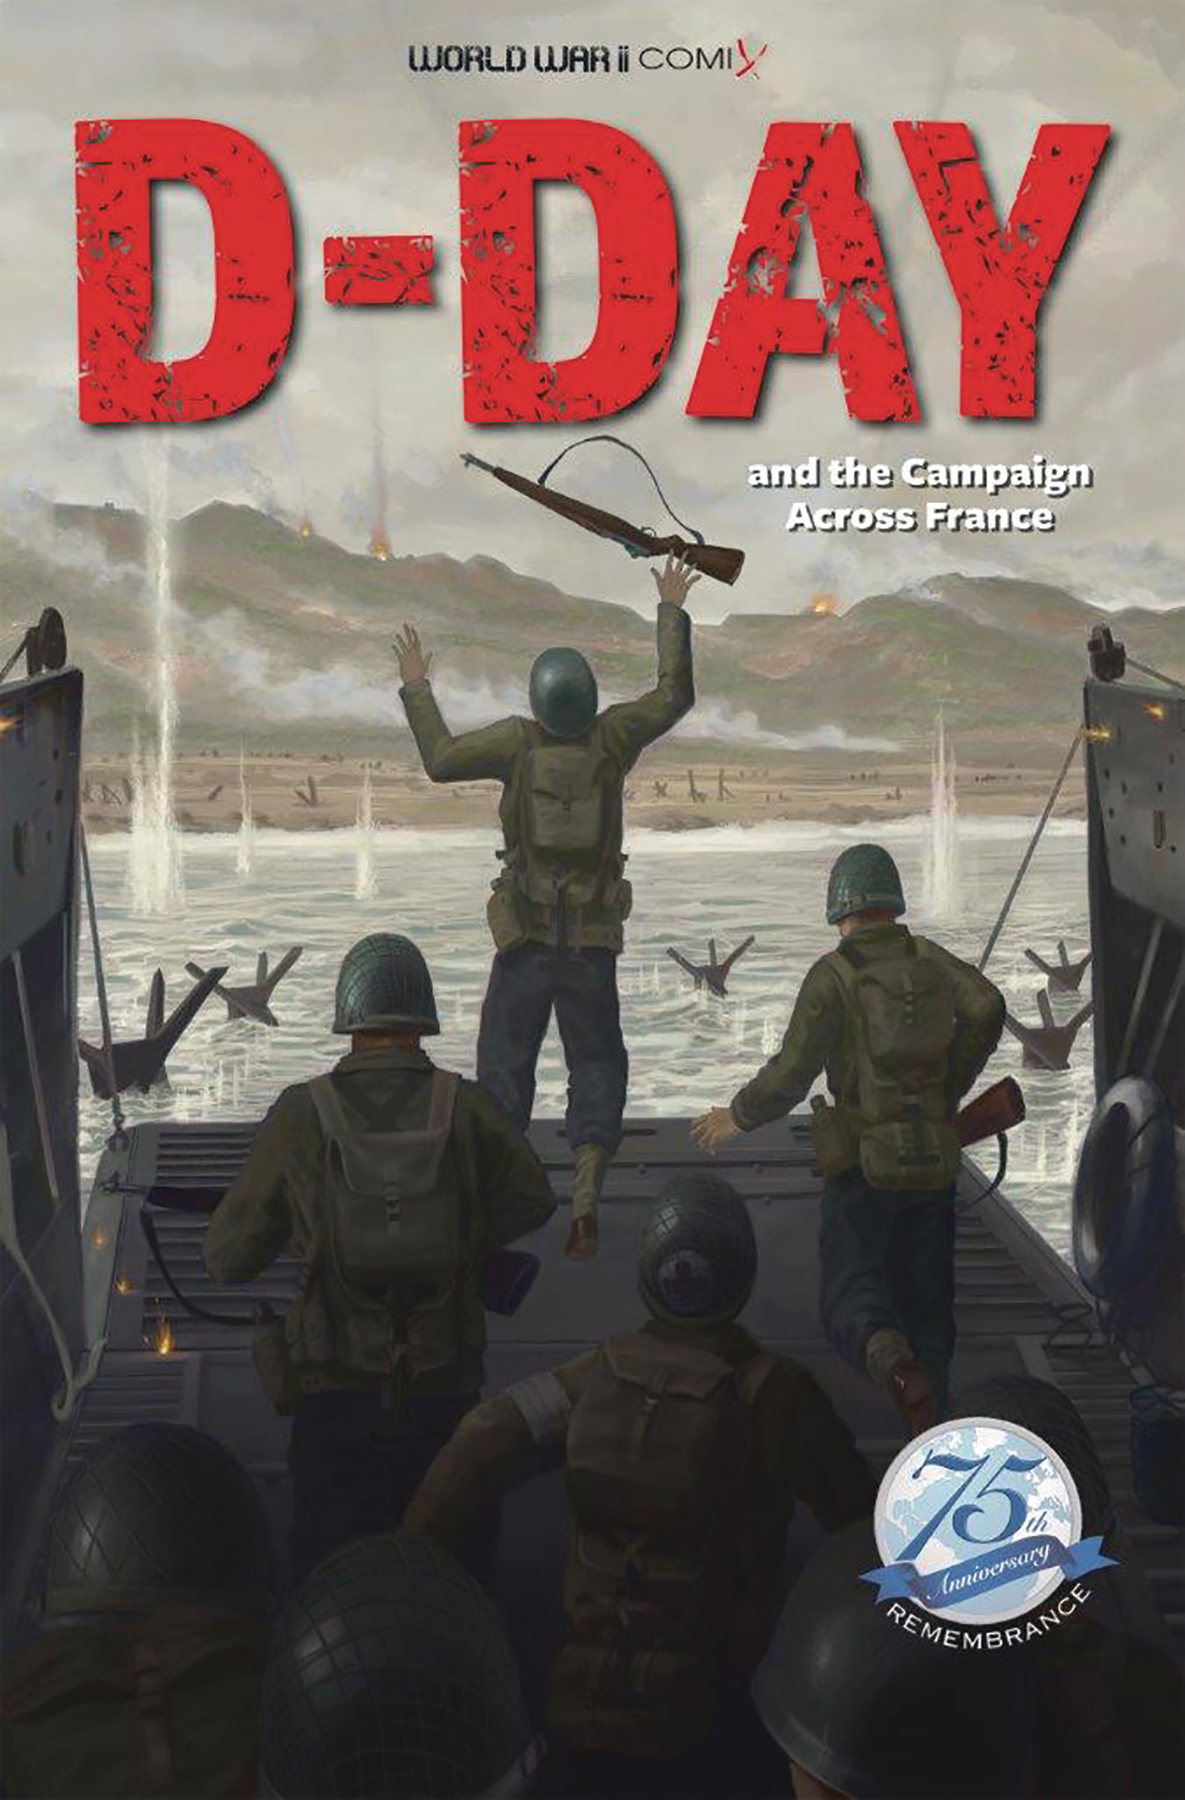 World War II Comix: D-Day and Campaign Across France no. 1 (2019)